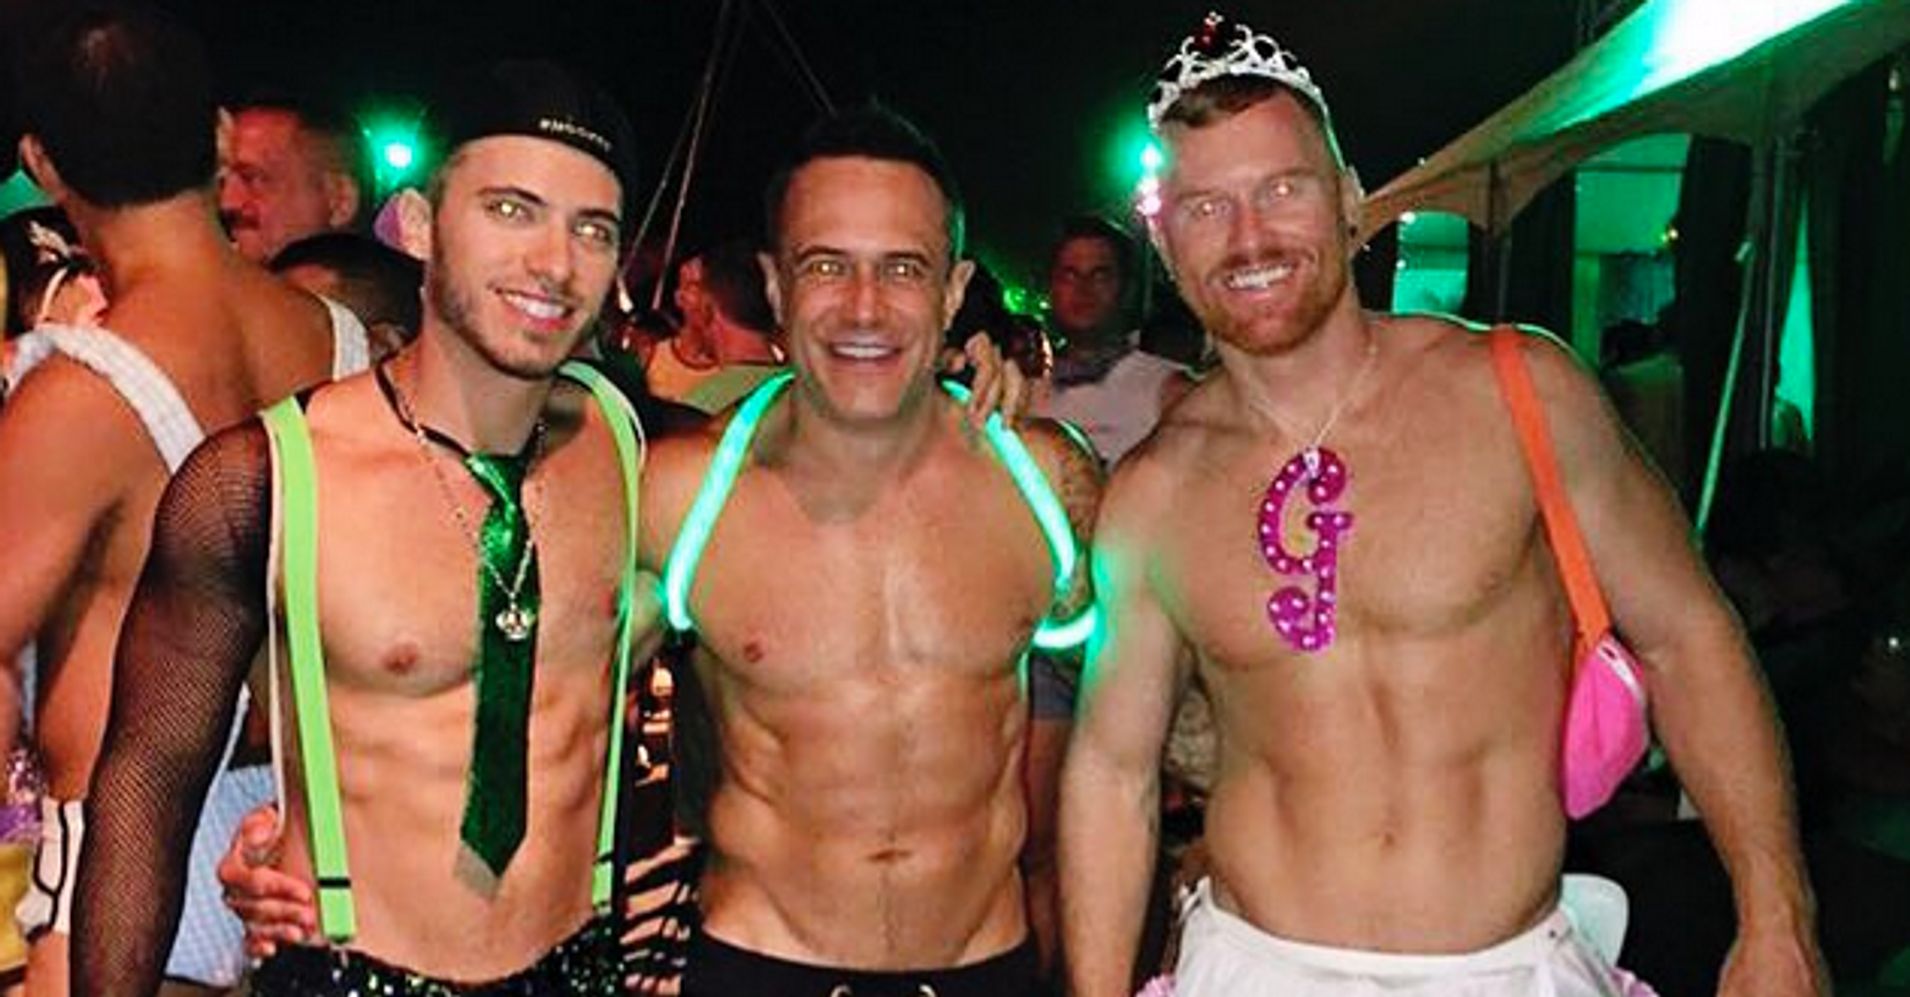 27 Of The Hottest Photos From The Fire Island Pines Party 2015 HuffPost